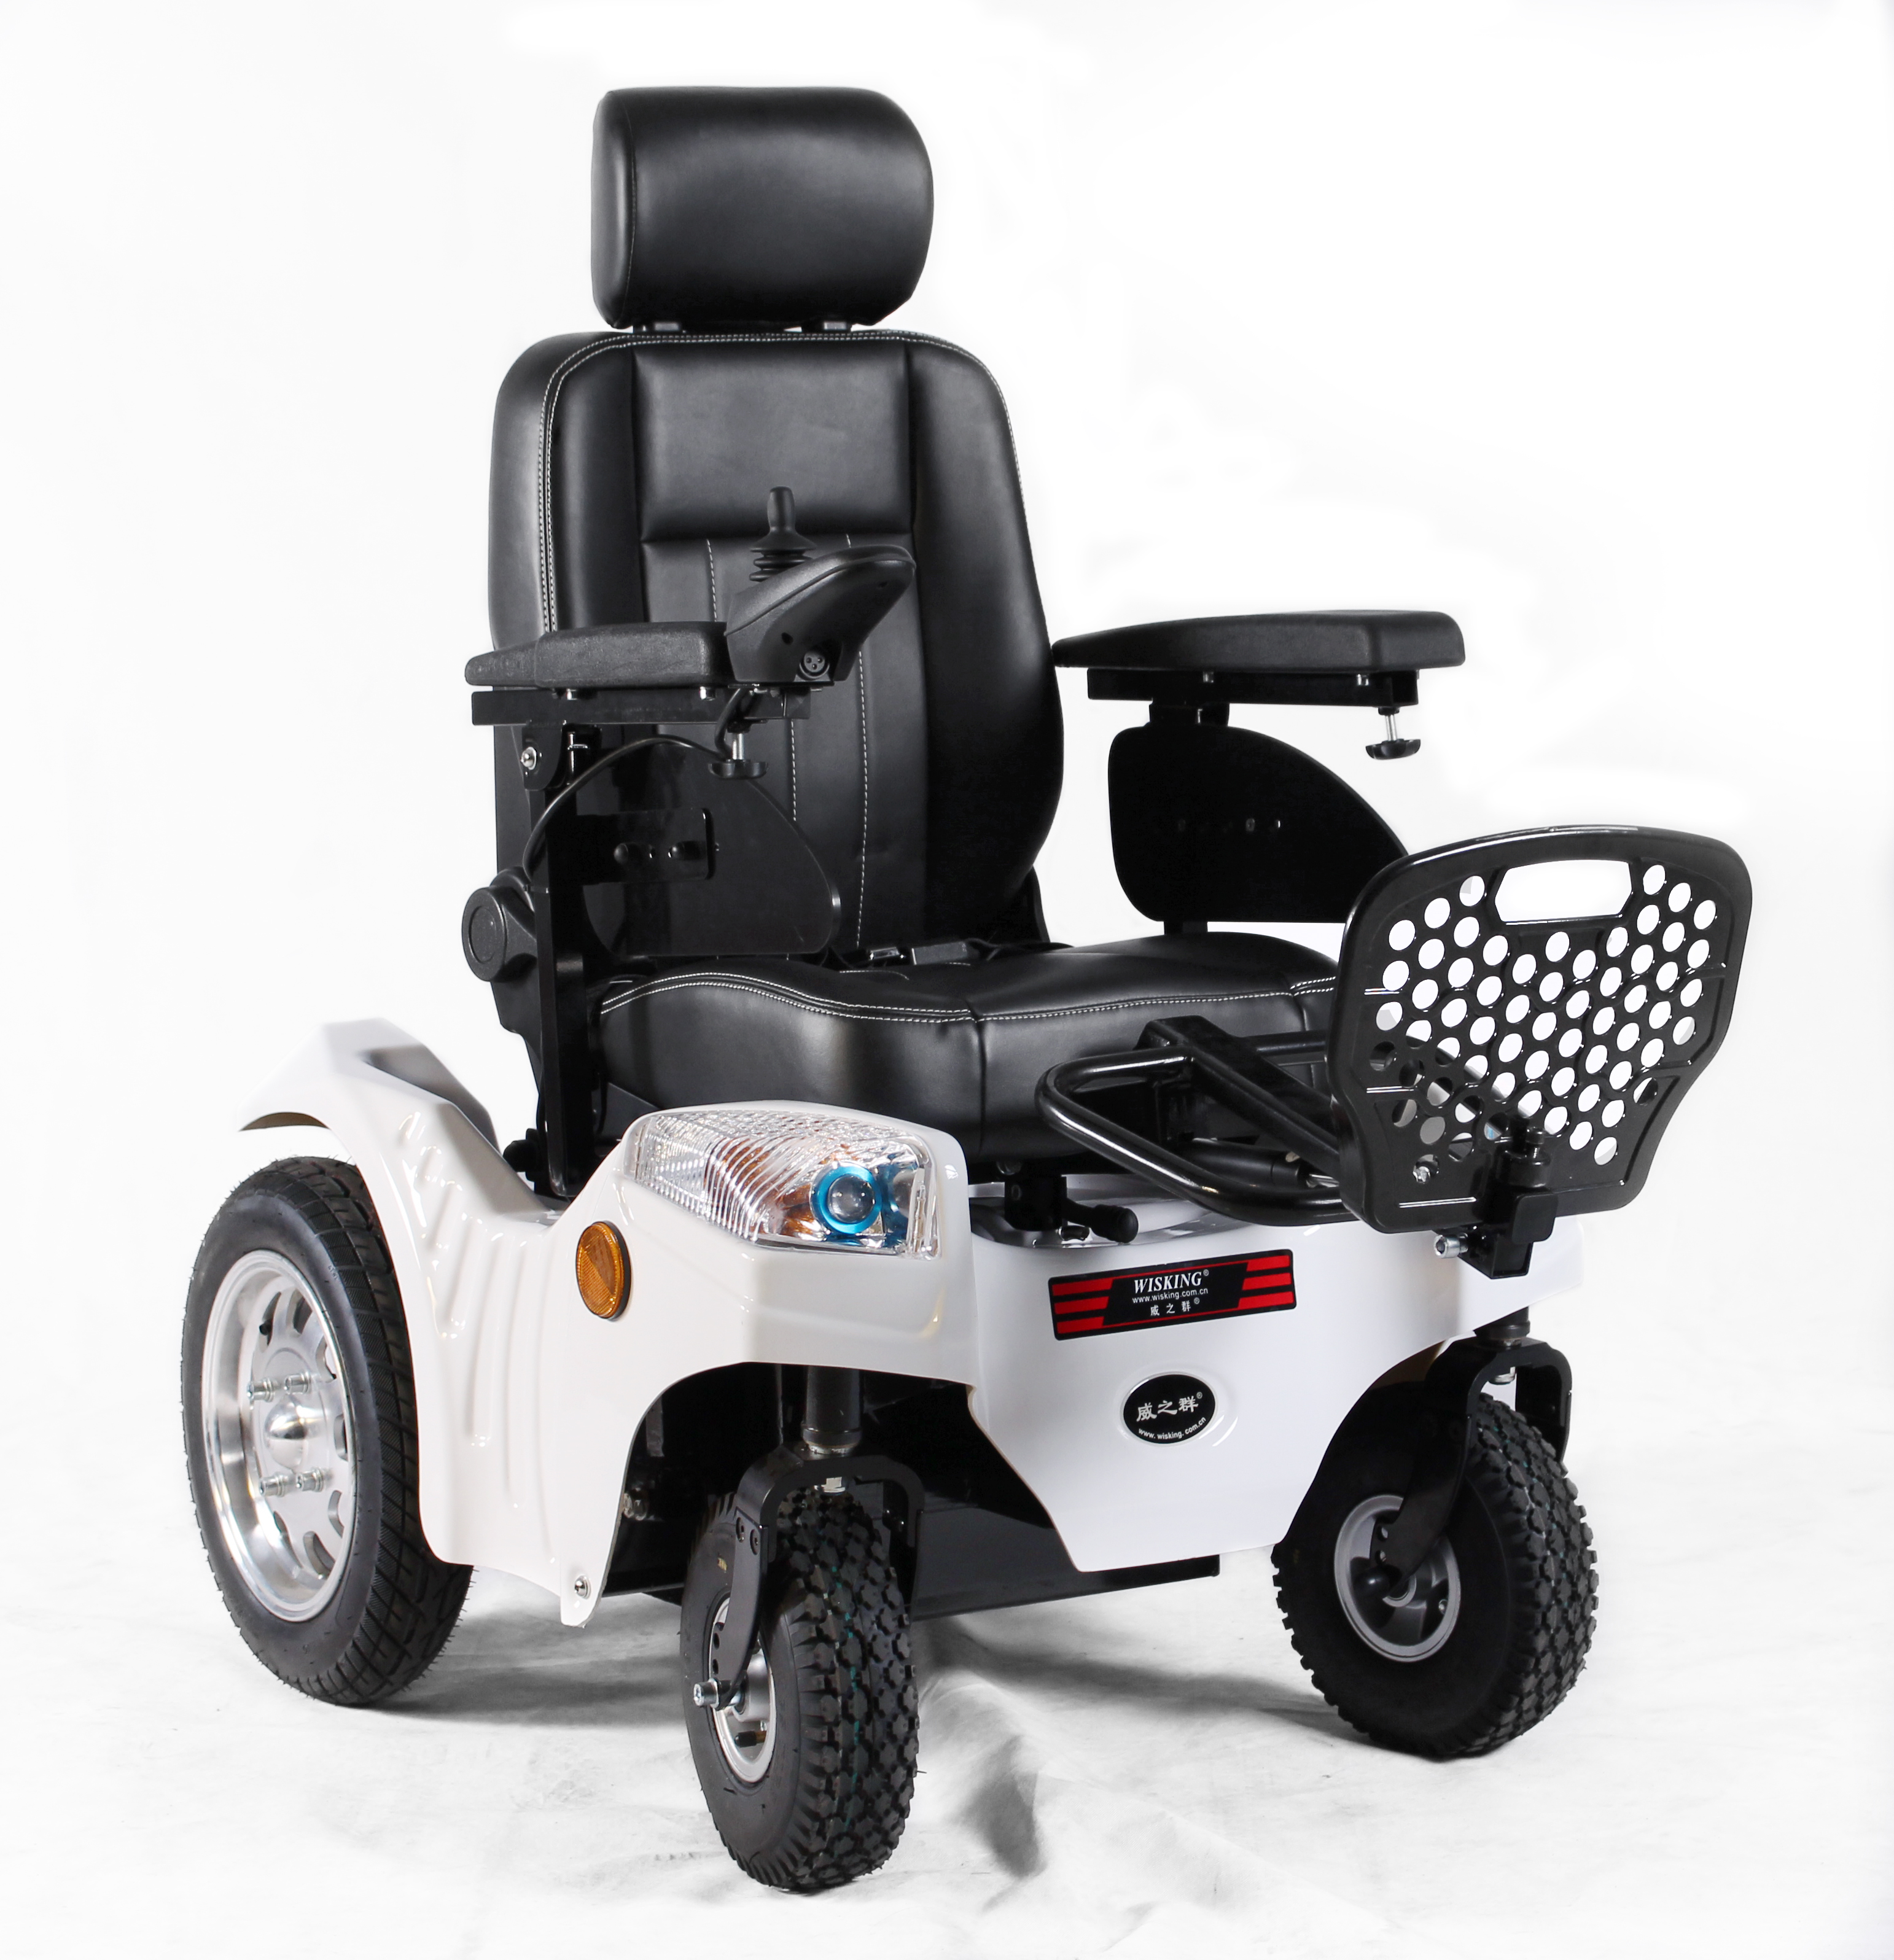 Off-road heavy duty functional power wheelchair for handicapped